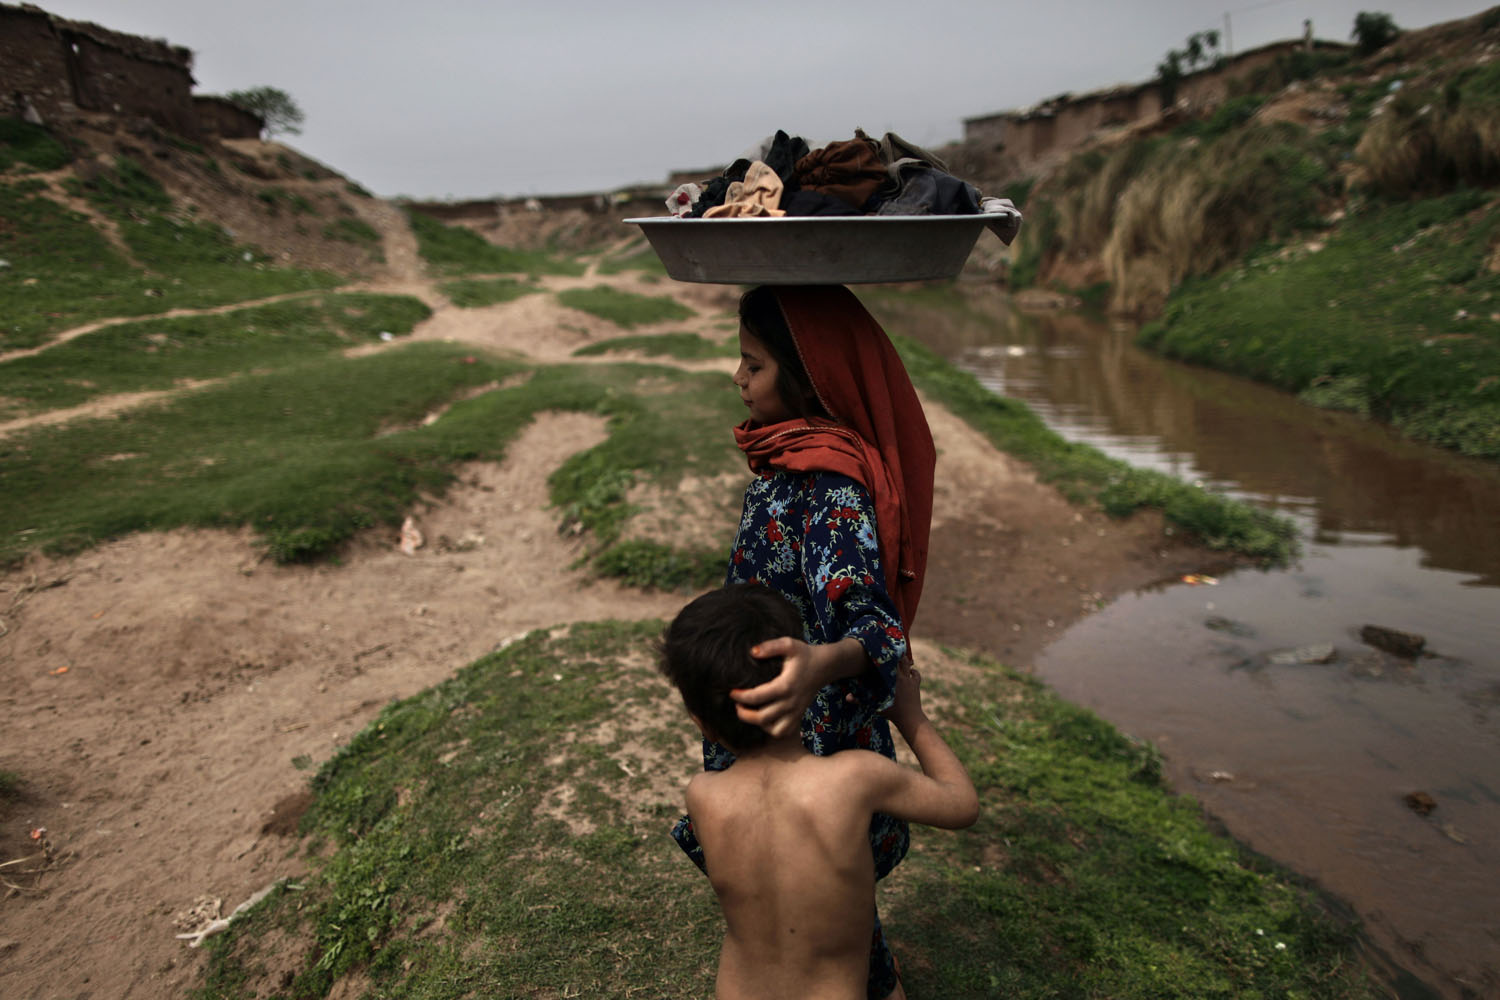 March 22, 2013. An Afghan refugee girl carries her laundry on her head after washing it in a polluted stream on World Water Day in a poor neighborhood on the outskirts of Islamabad. The U.N. estimates that more than one in six people worldwide do not have access to 20-50 liters (5-13 gallons) of safe freshwater a day to ensure their basic needs for drinking, cooking and cleaning.